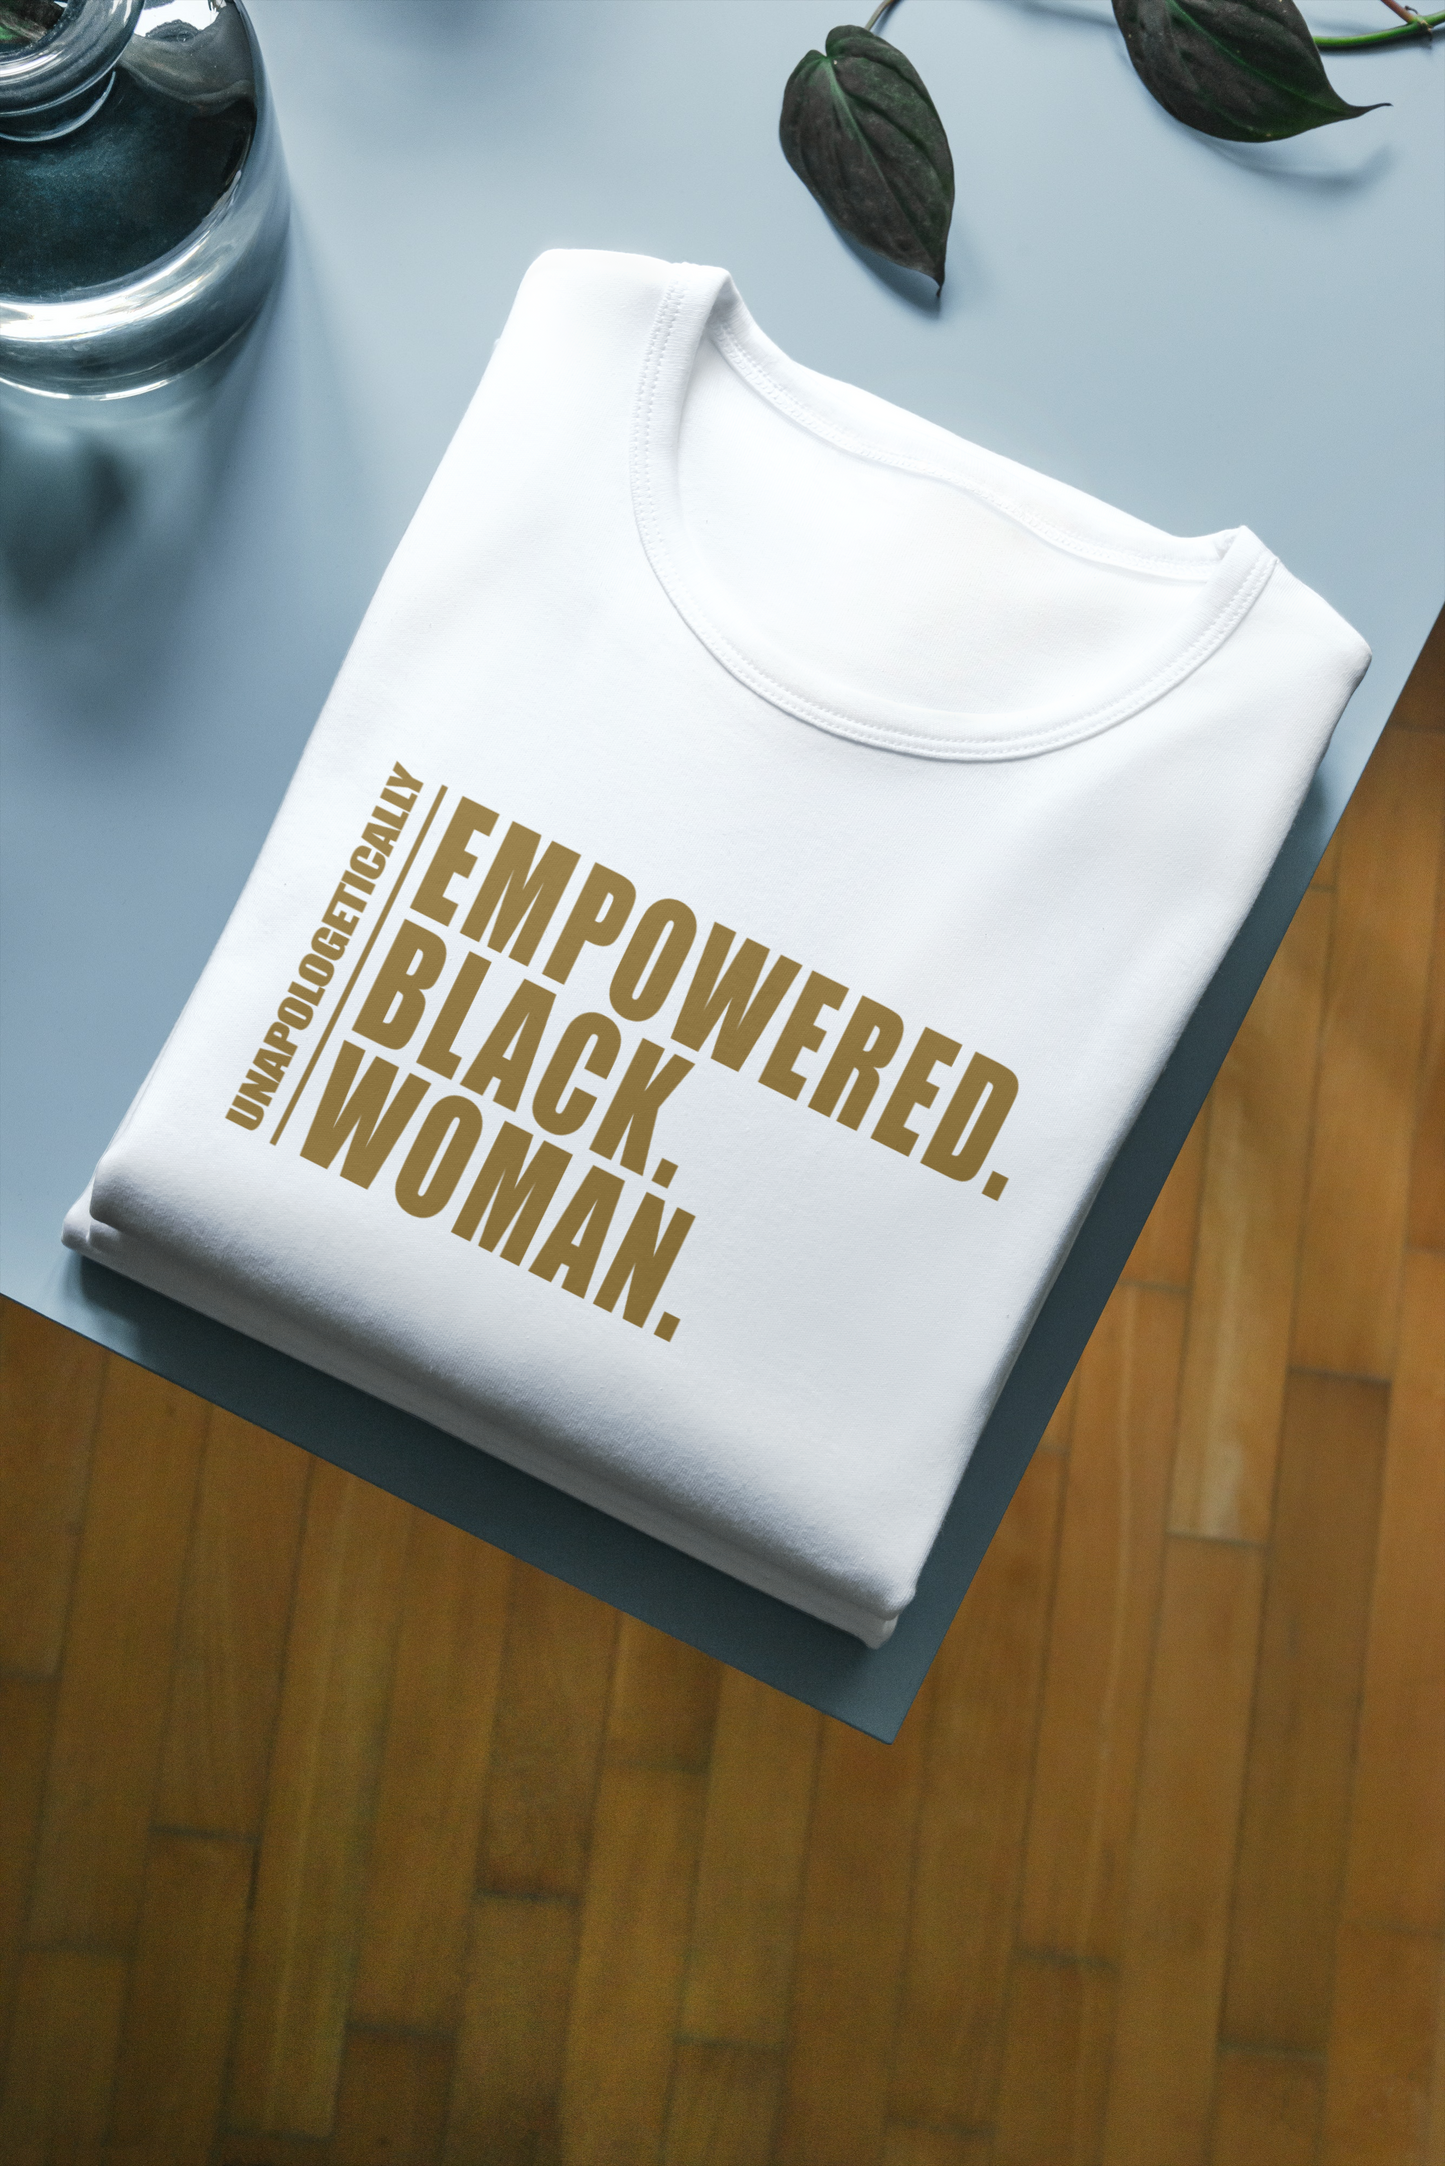 Women's Unapologetically Empowered Black Woman Tee (White)